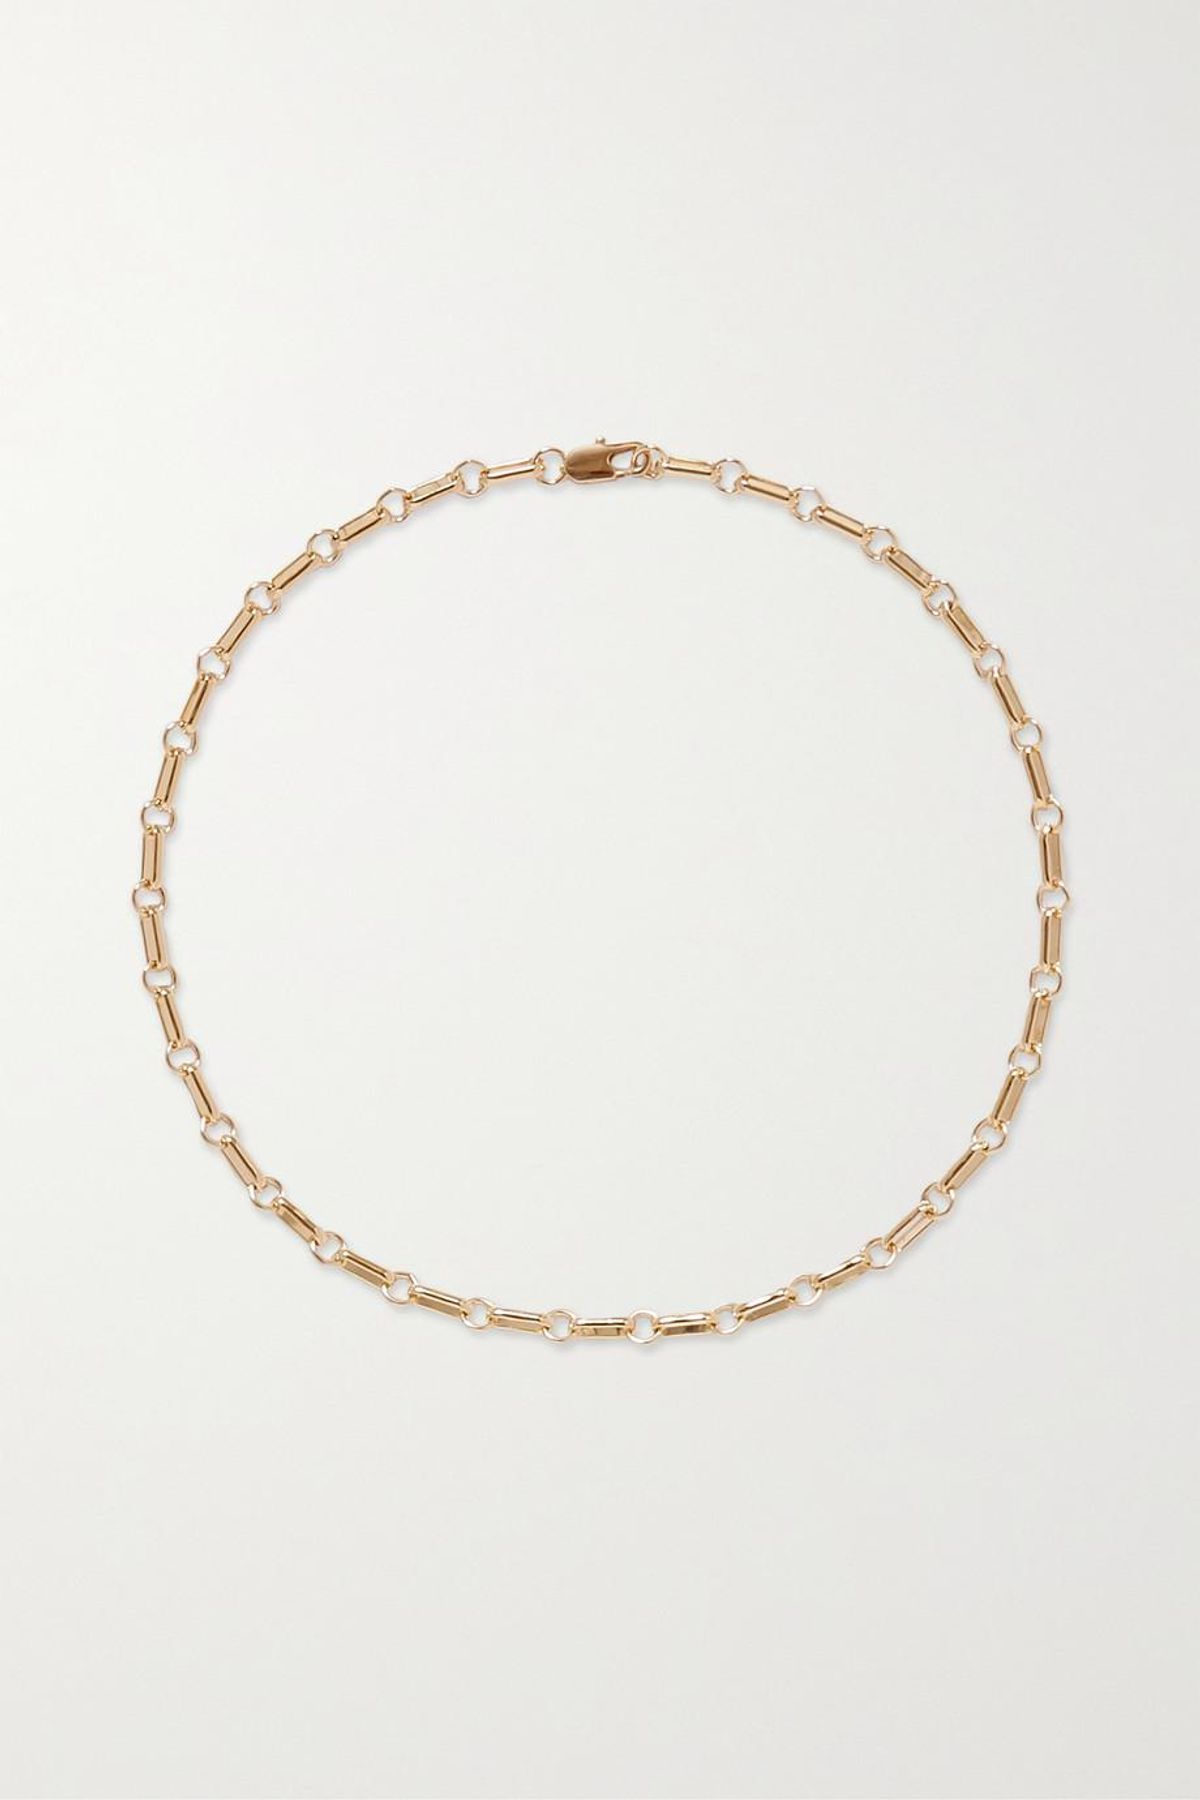 laura lombardi gold plated necklace